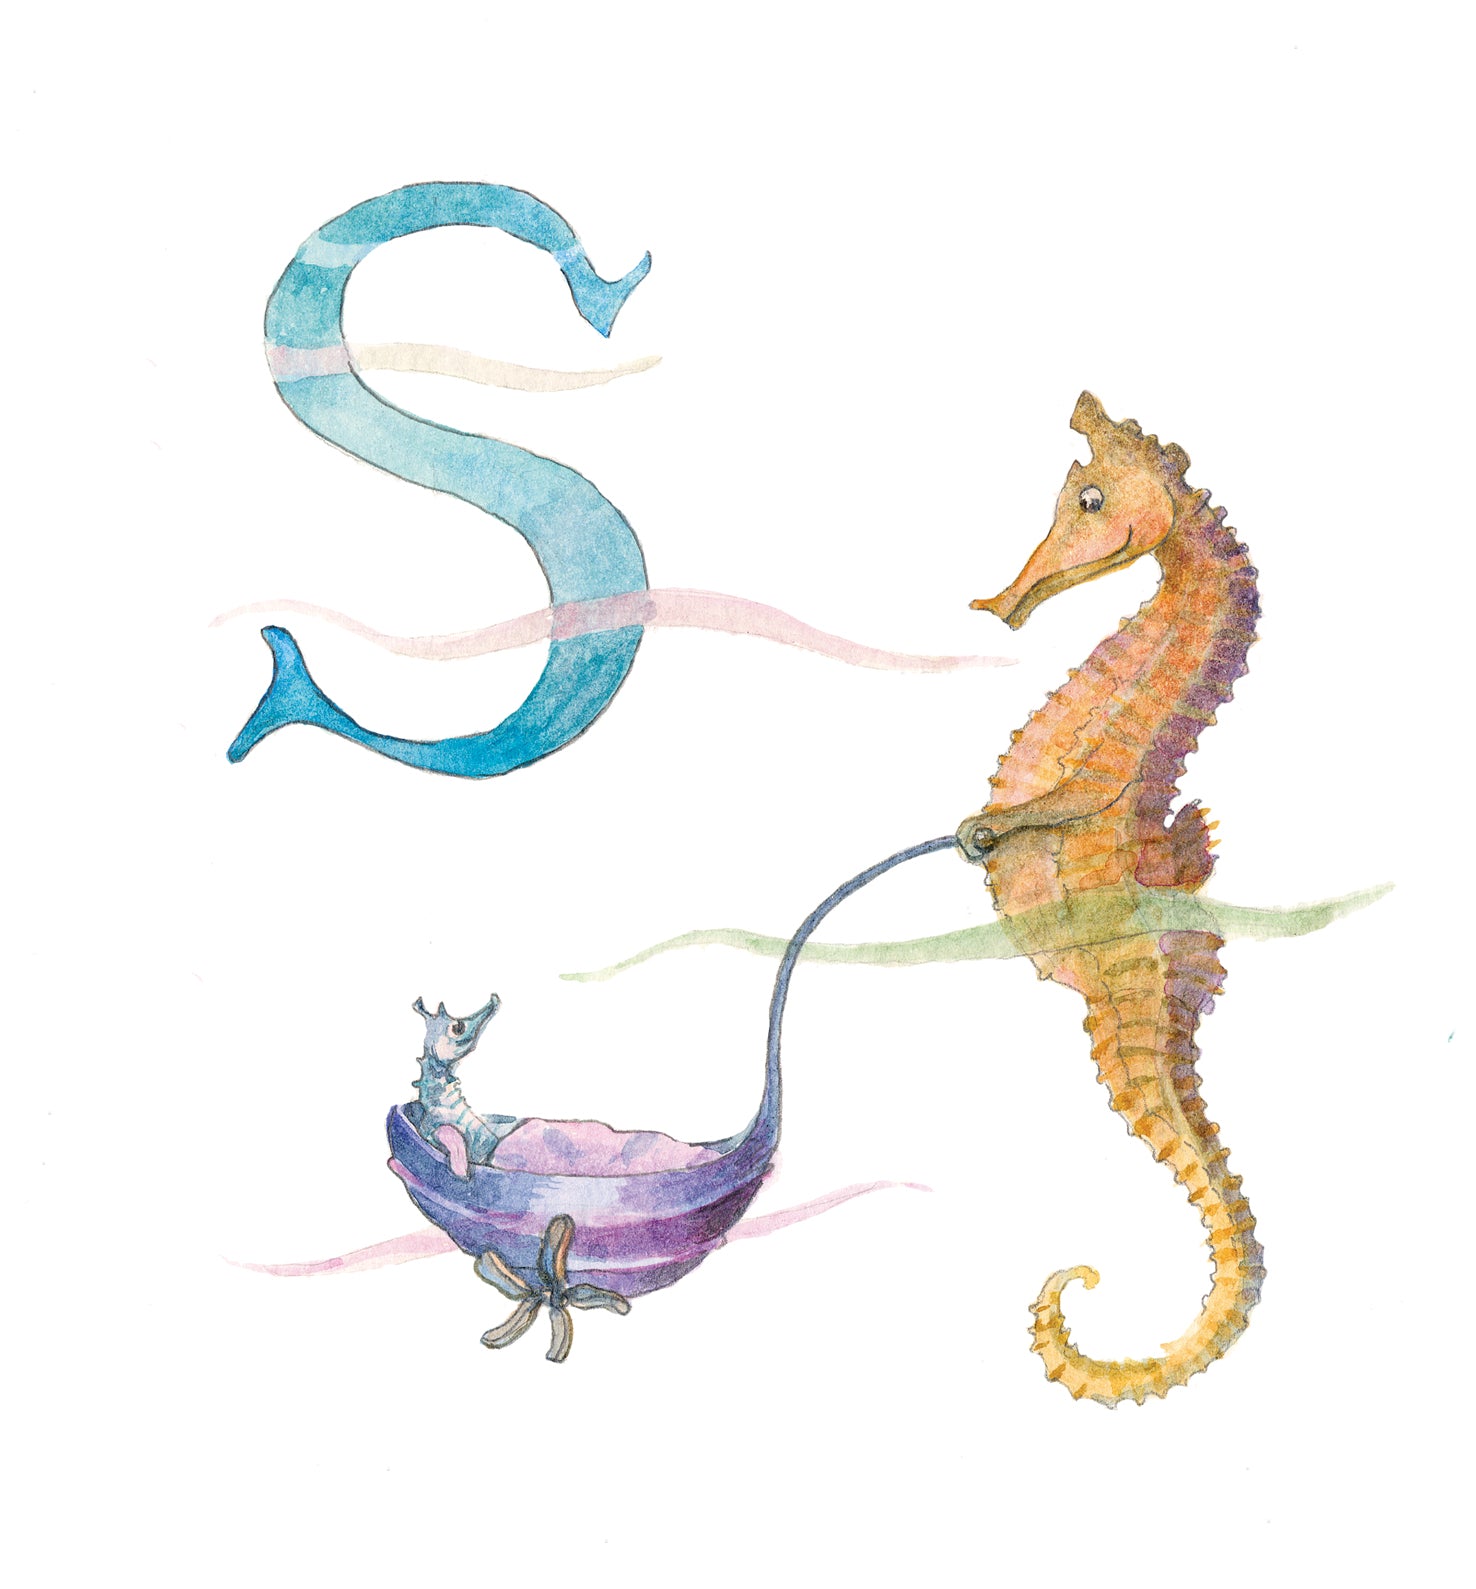 S for Seahorse